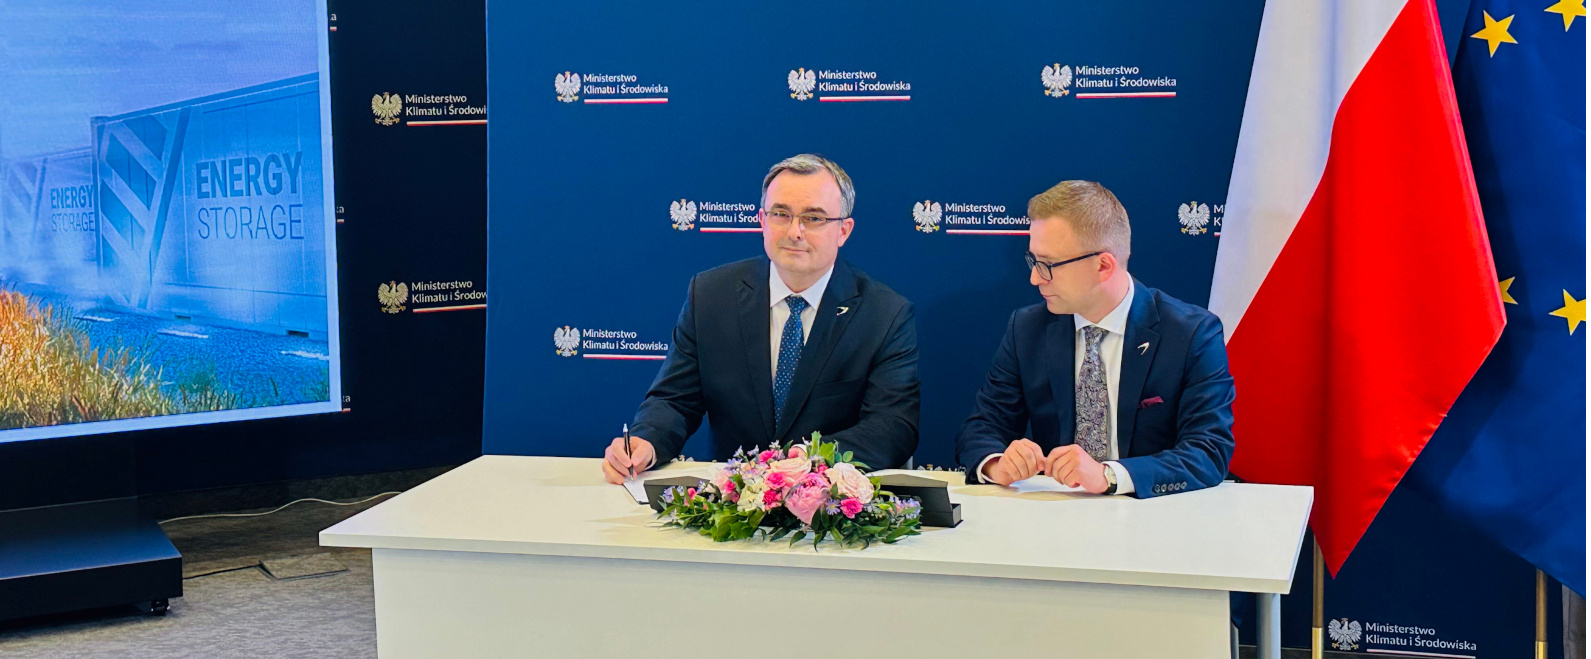 Grupa Azoty S.A. among signatories of letter of intent to develop Polish ion cell technology for electrochemical energy storage